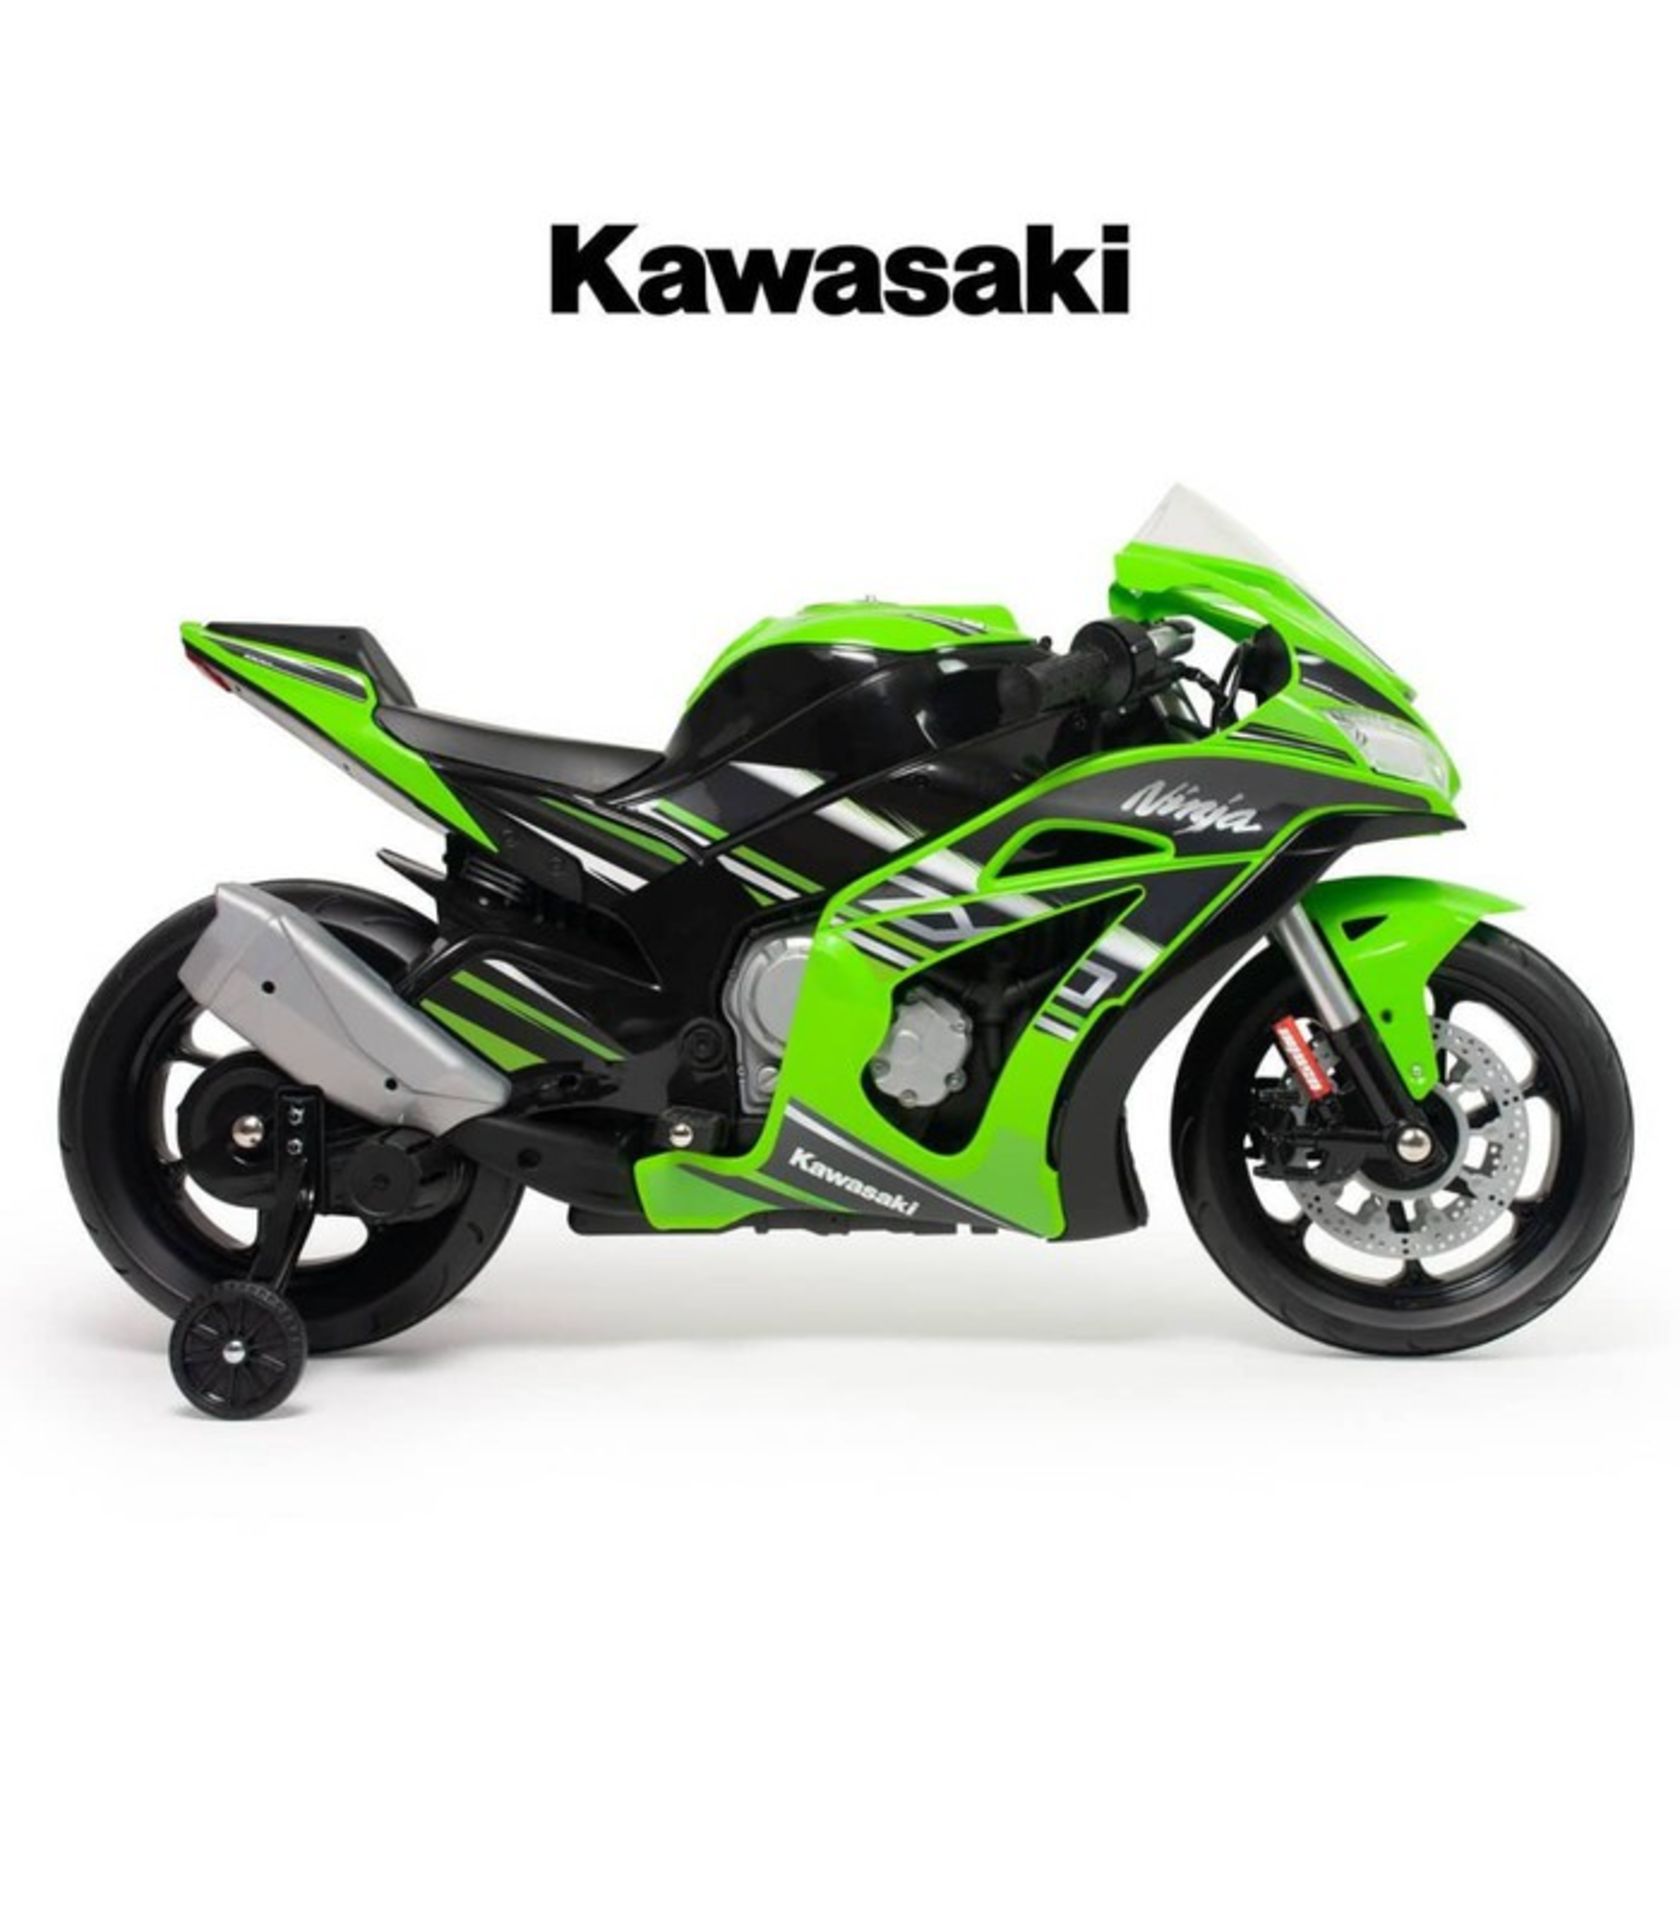 1 x Injusa Kids Electric Ride On Kawasaki ZX10 12V Motorcycle - 6495 - HTYS174 - CL987 - Location: - Image 4 of 24